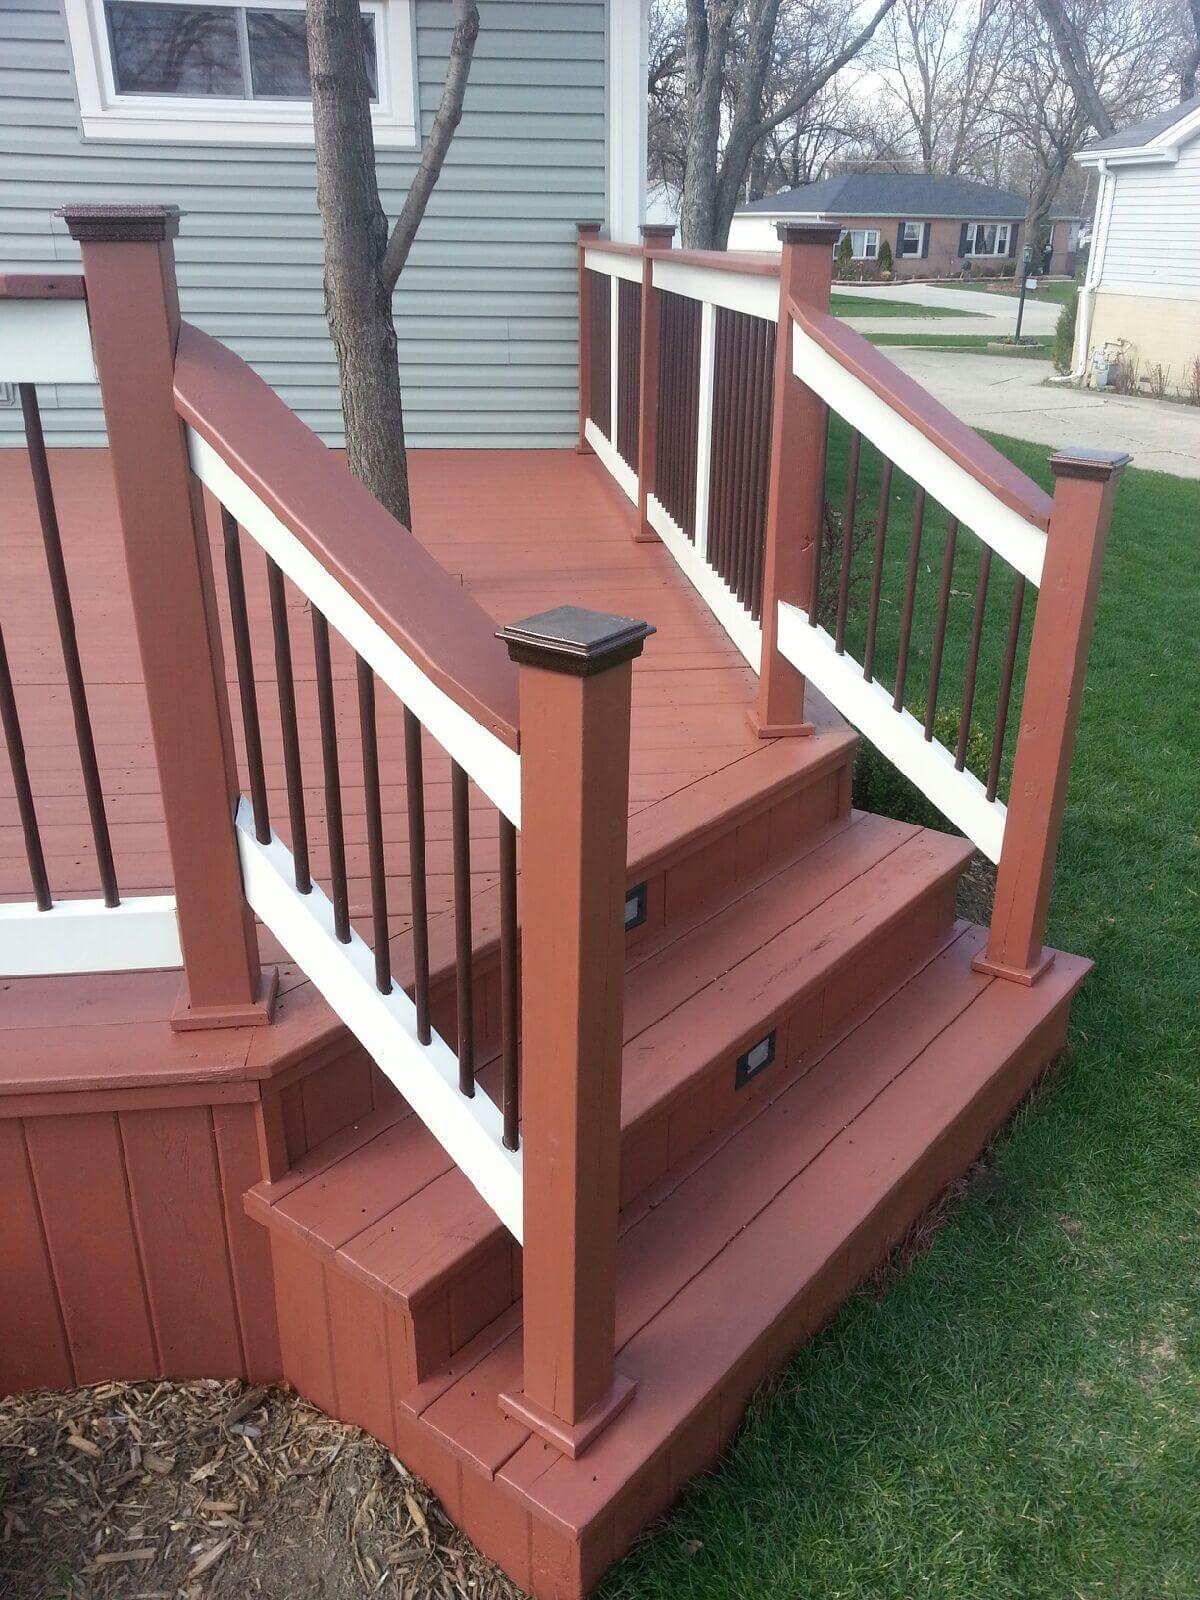 Repairs and maintenance for your deck, fence, and exterior wood staining. - Deck Staining Glencoe - Deck Cleaning Services